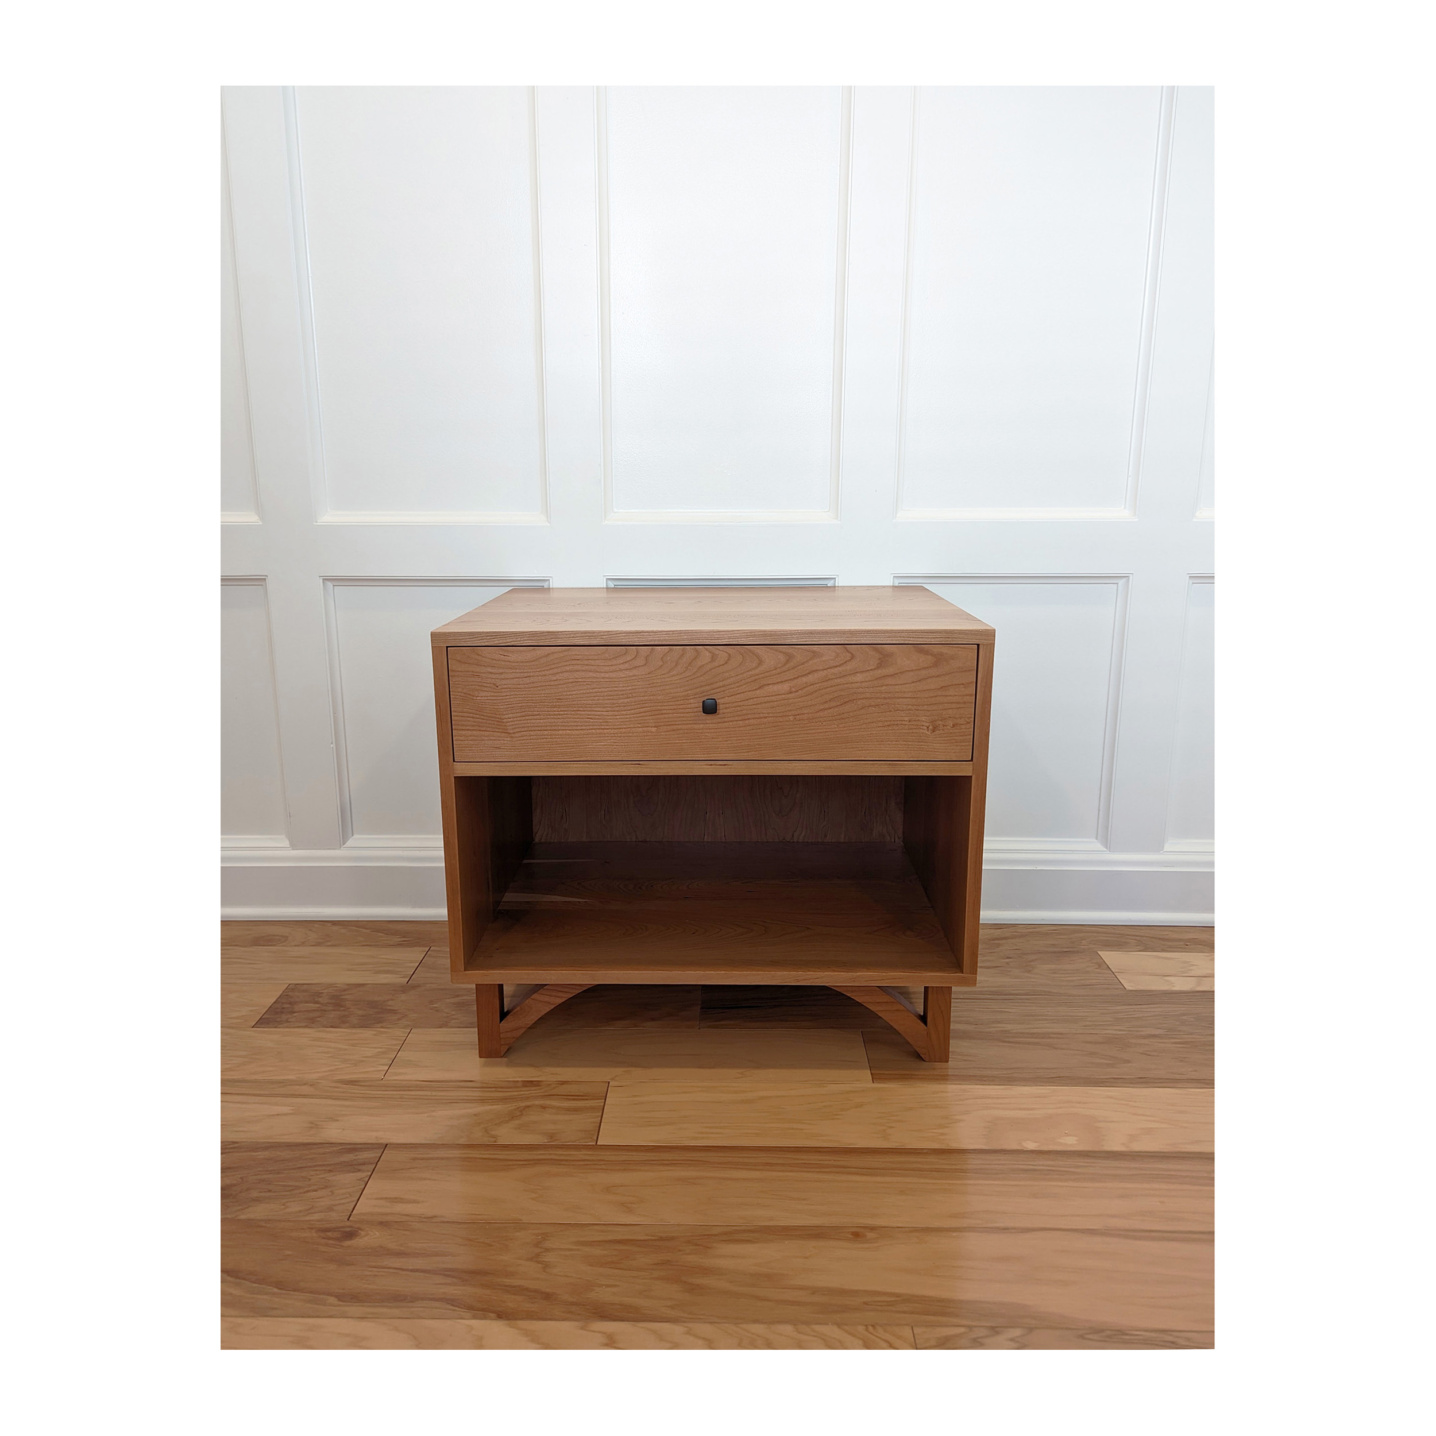 Custom Nightstand---Constructed in Solid Cherry Wood